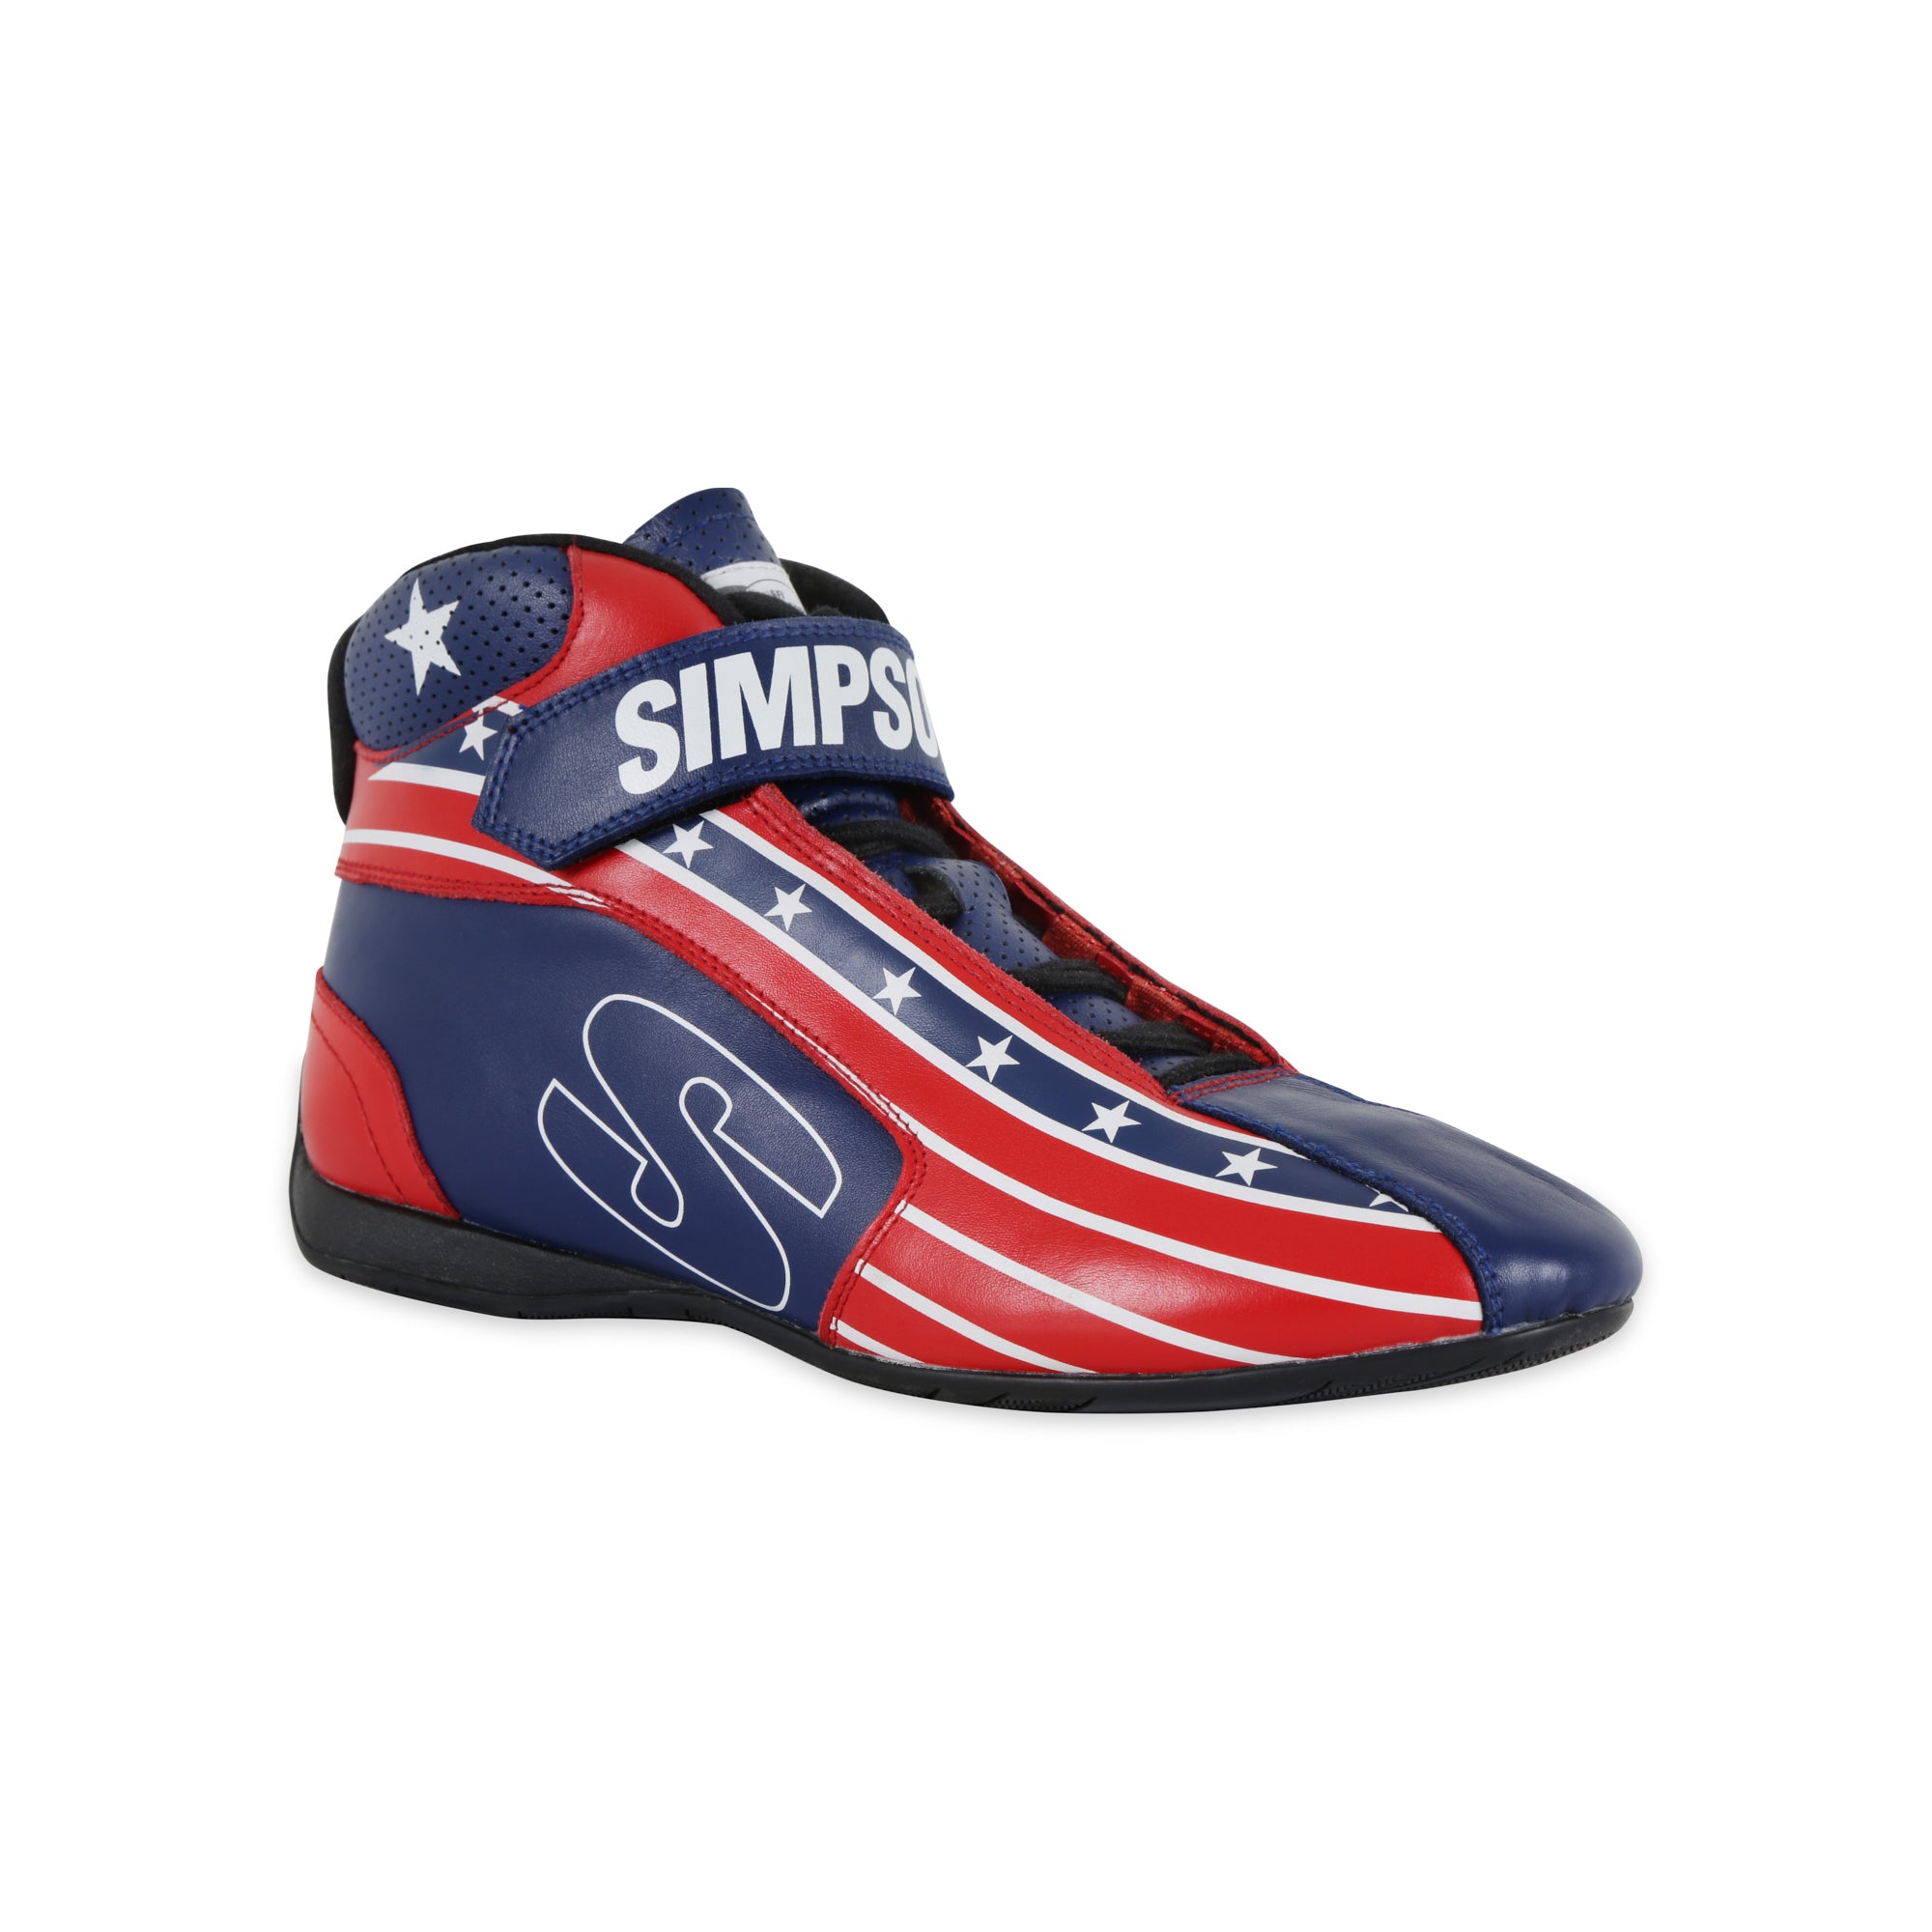 Simpson Shoe DNA X2 Patriot Size 10.5 Safety Clothing Driving Shoes and Boots main image